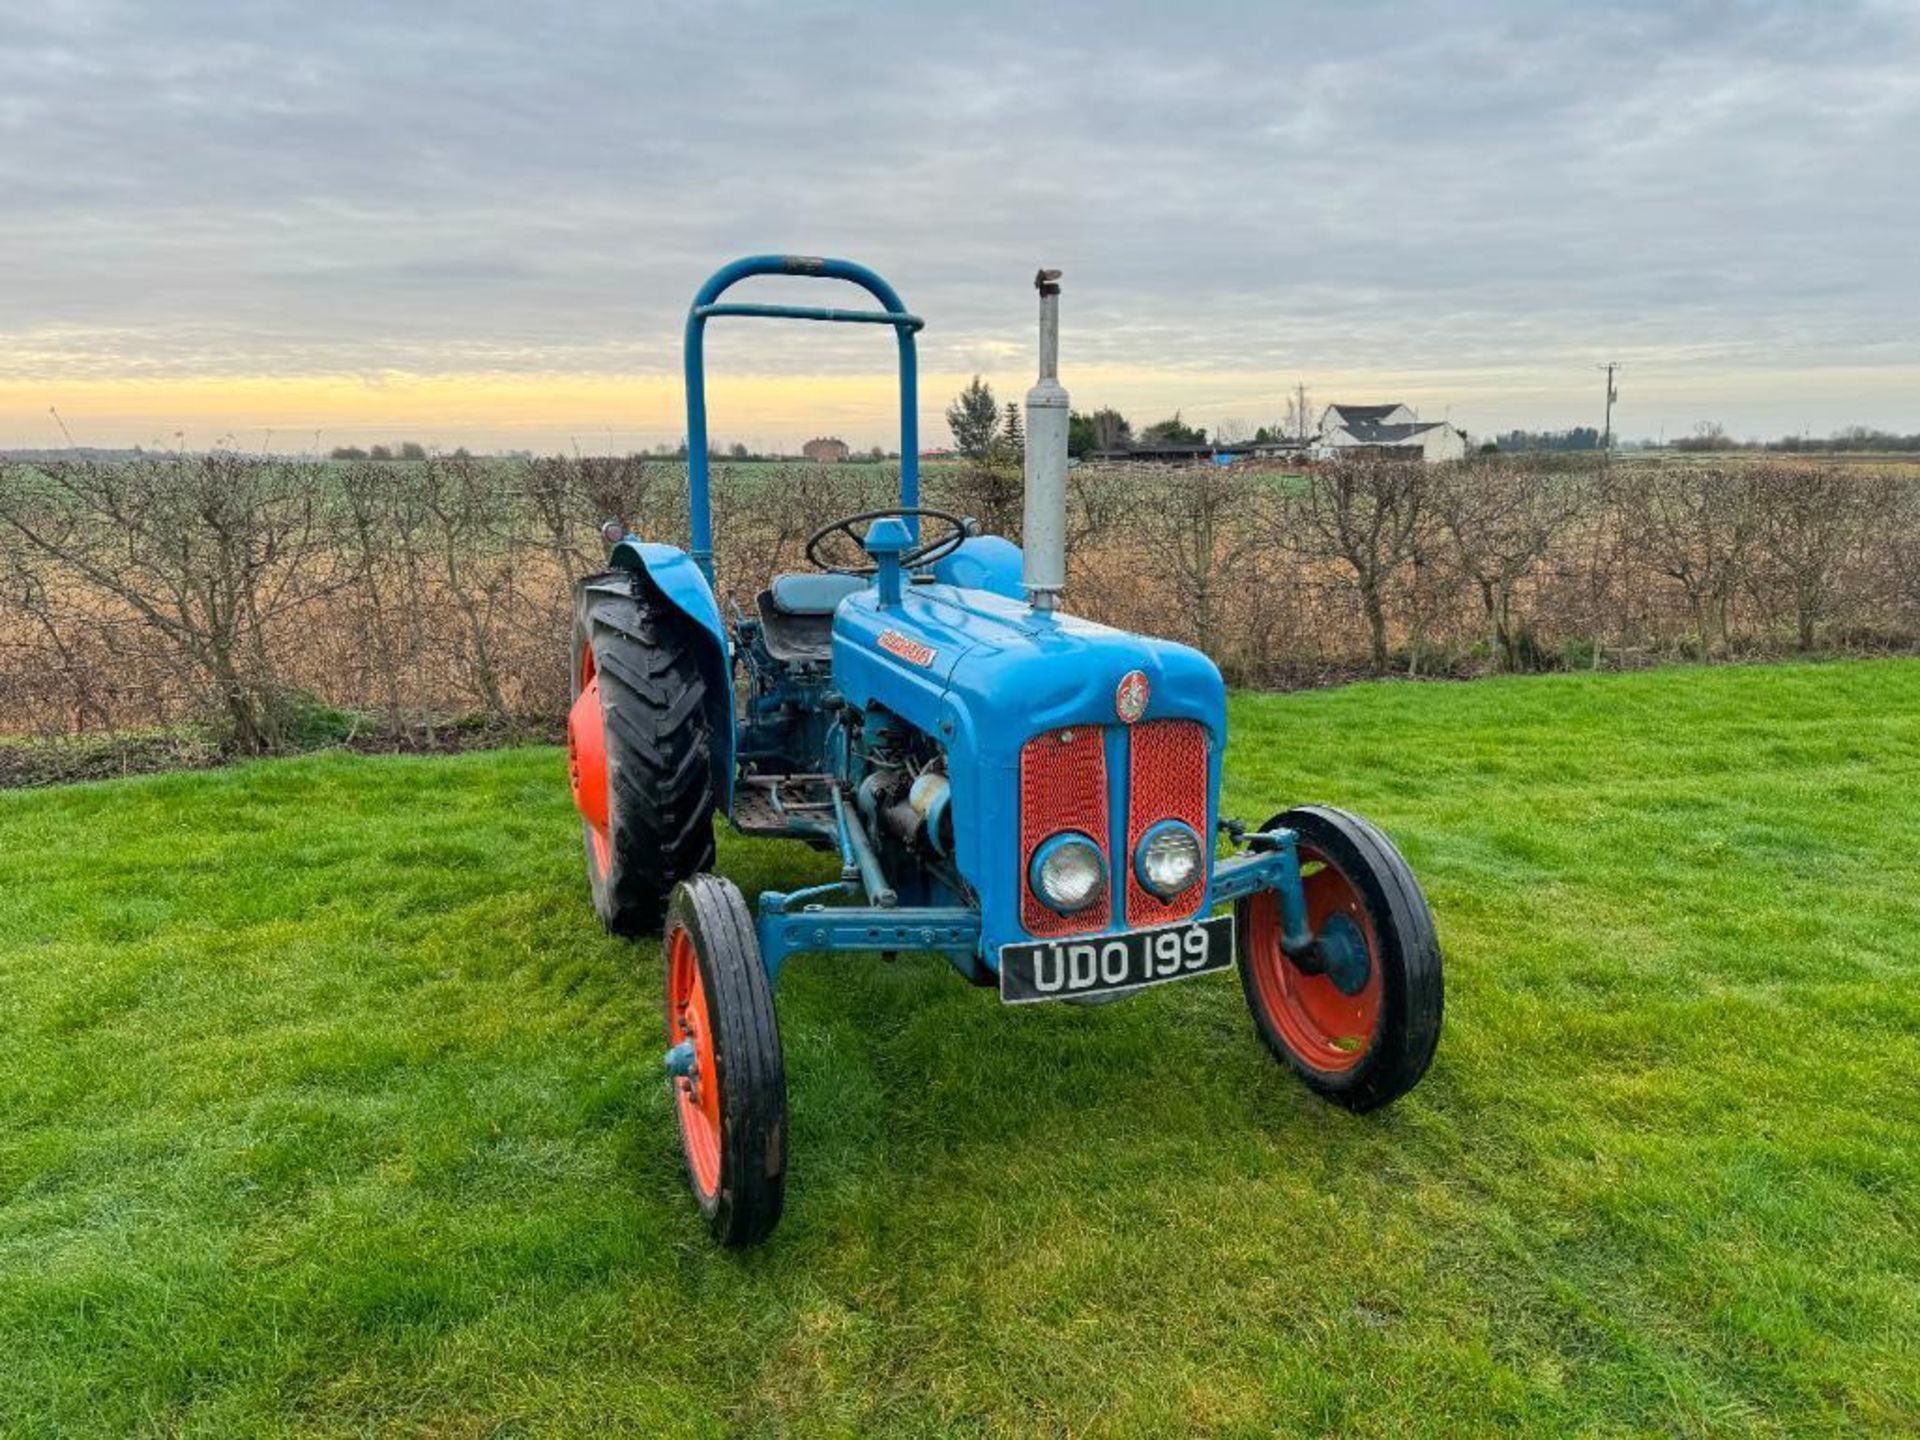 1962 Fordson Dexta 2wd diesel tractor with pick up hitch, rear linkage and rollbar on 12.4/11-28 rea - Bild 9 aus 14